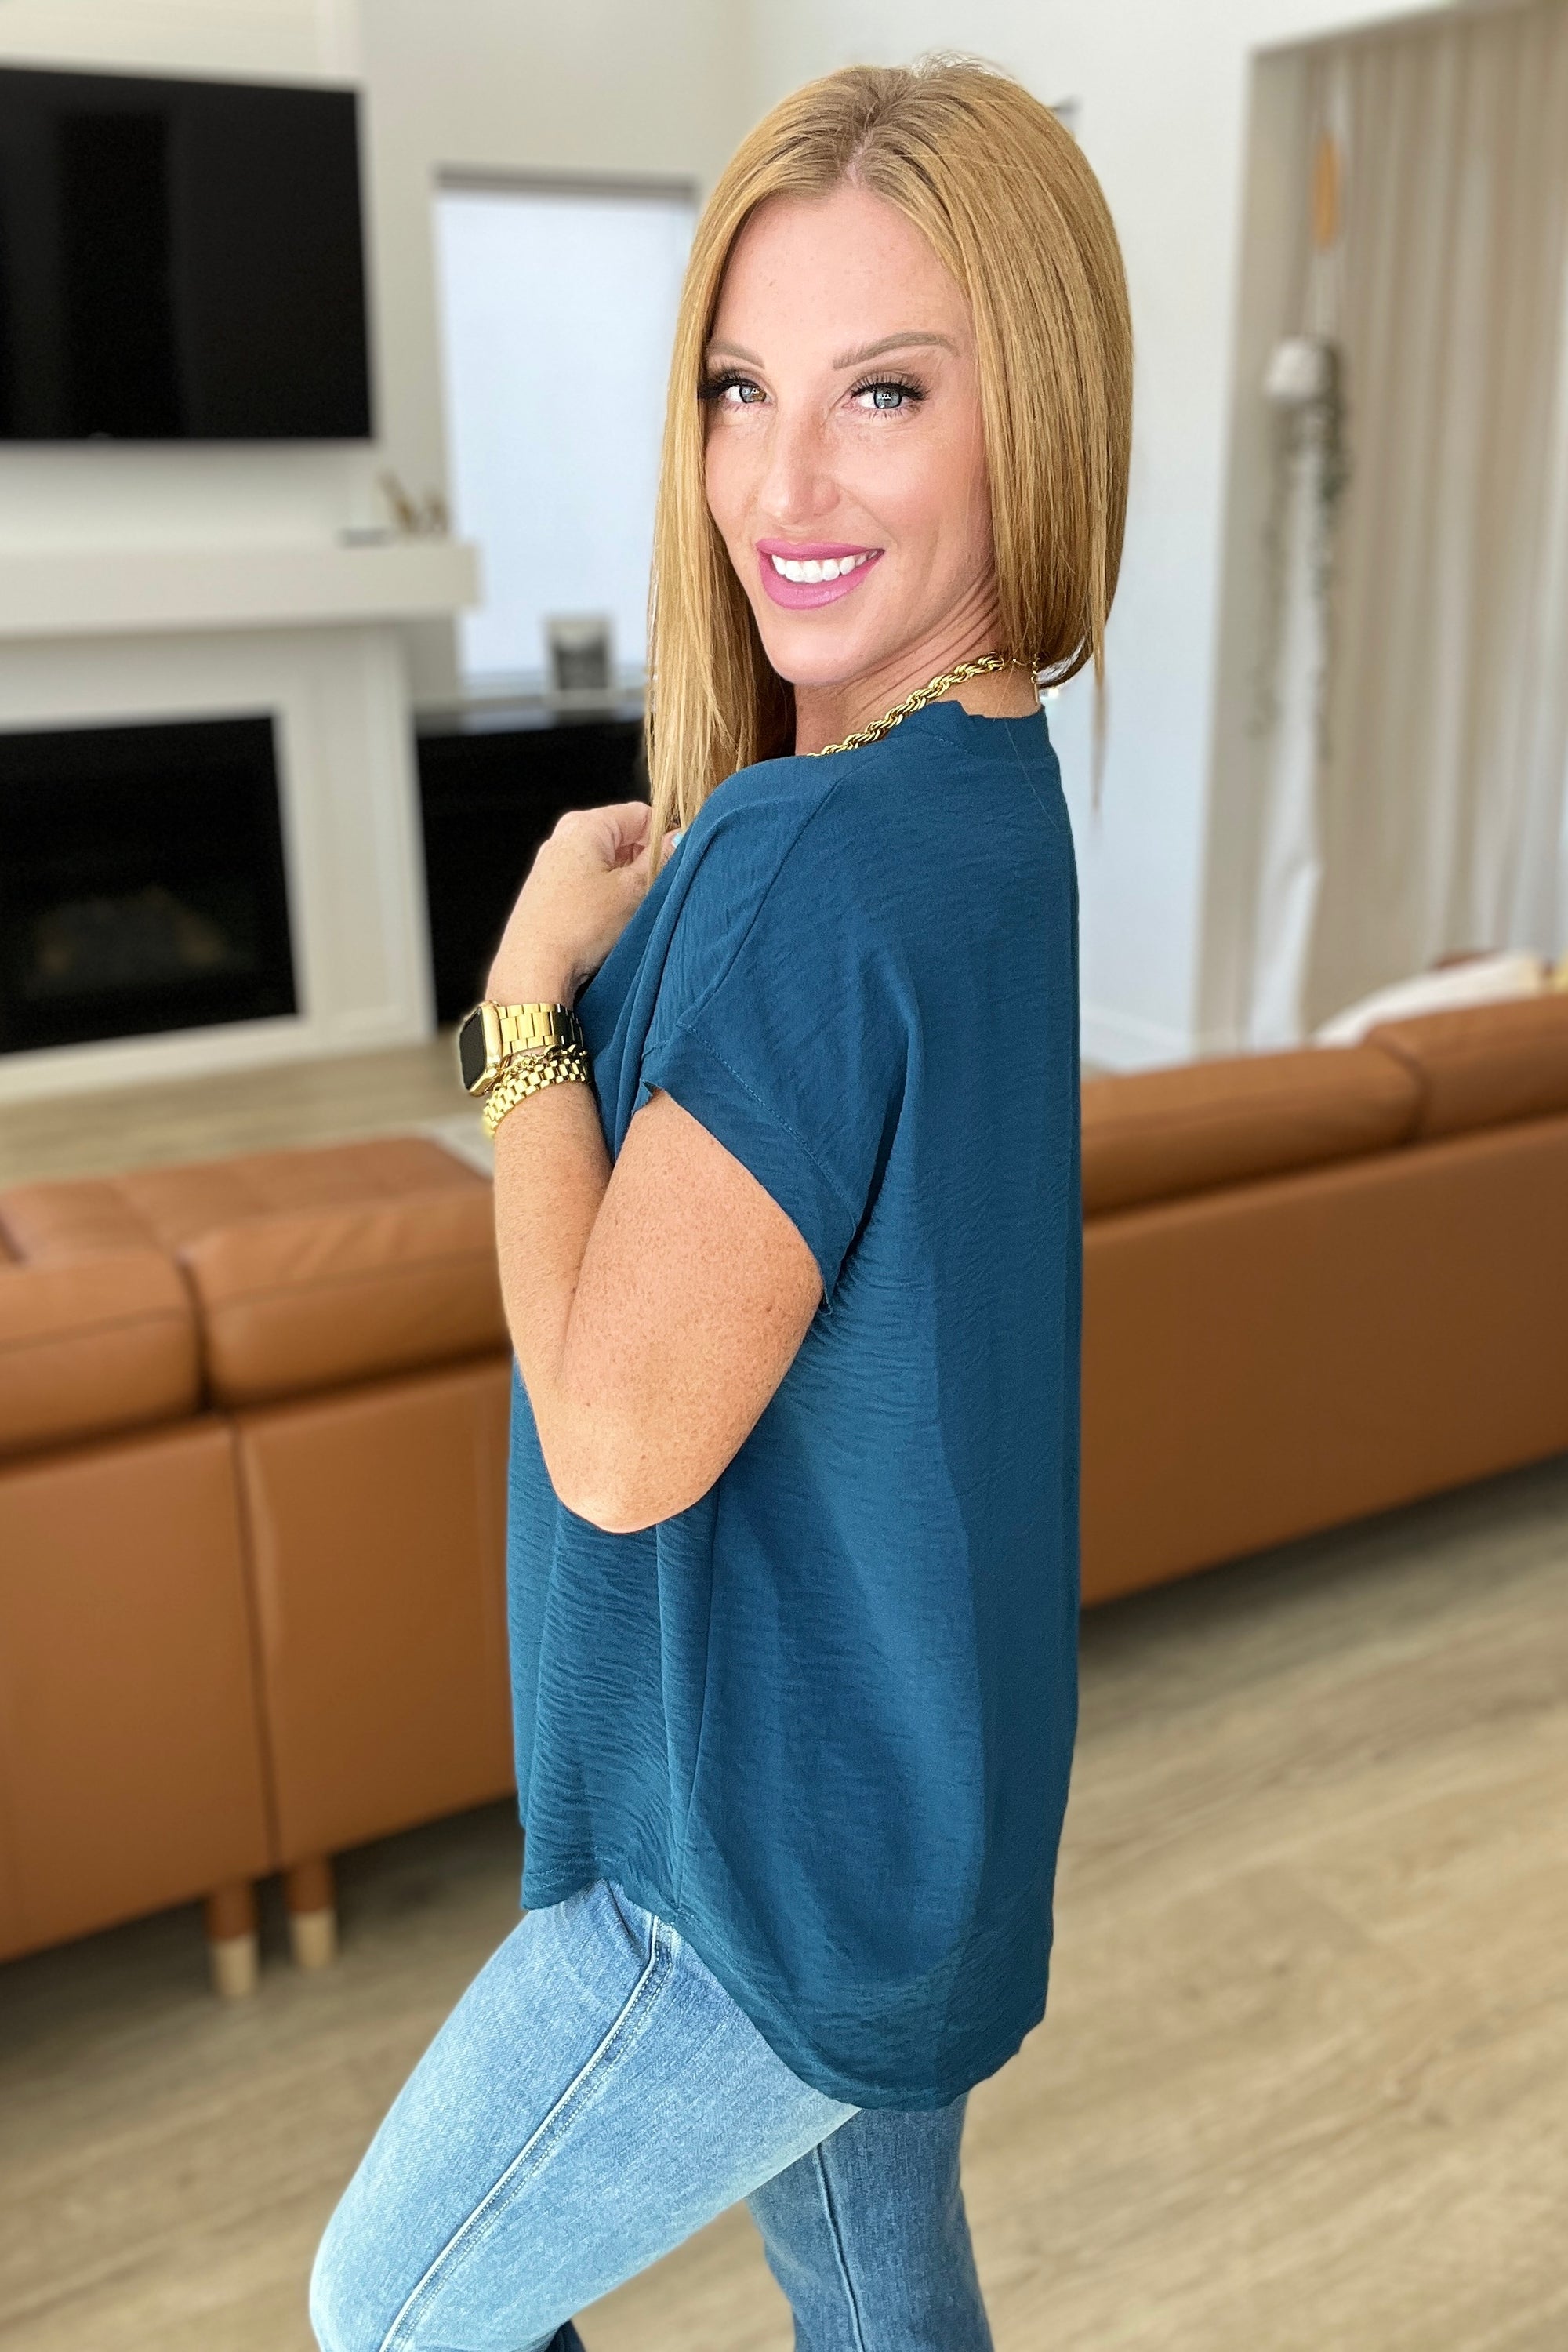 Very Much Needed V-Neck Top in Teal